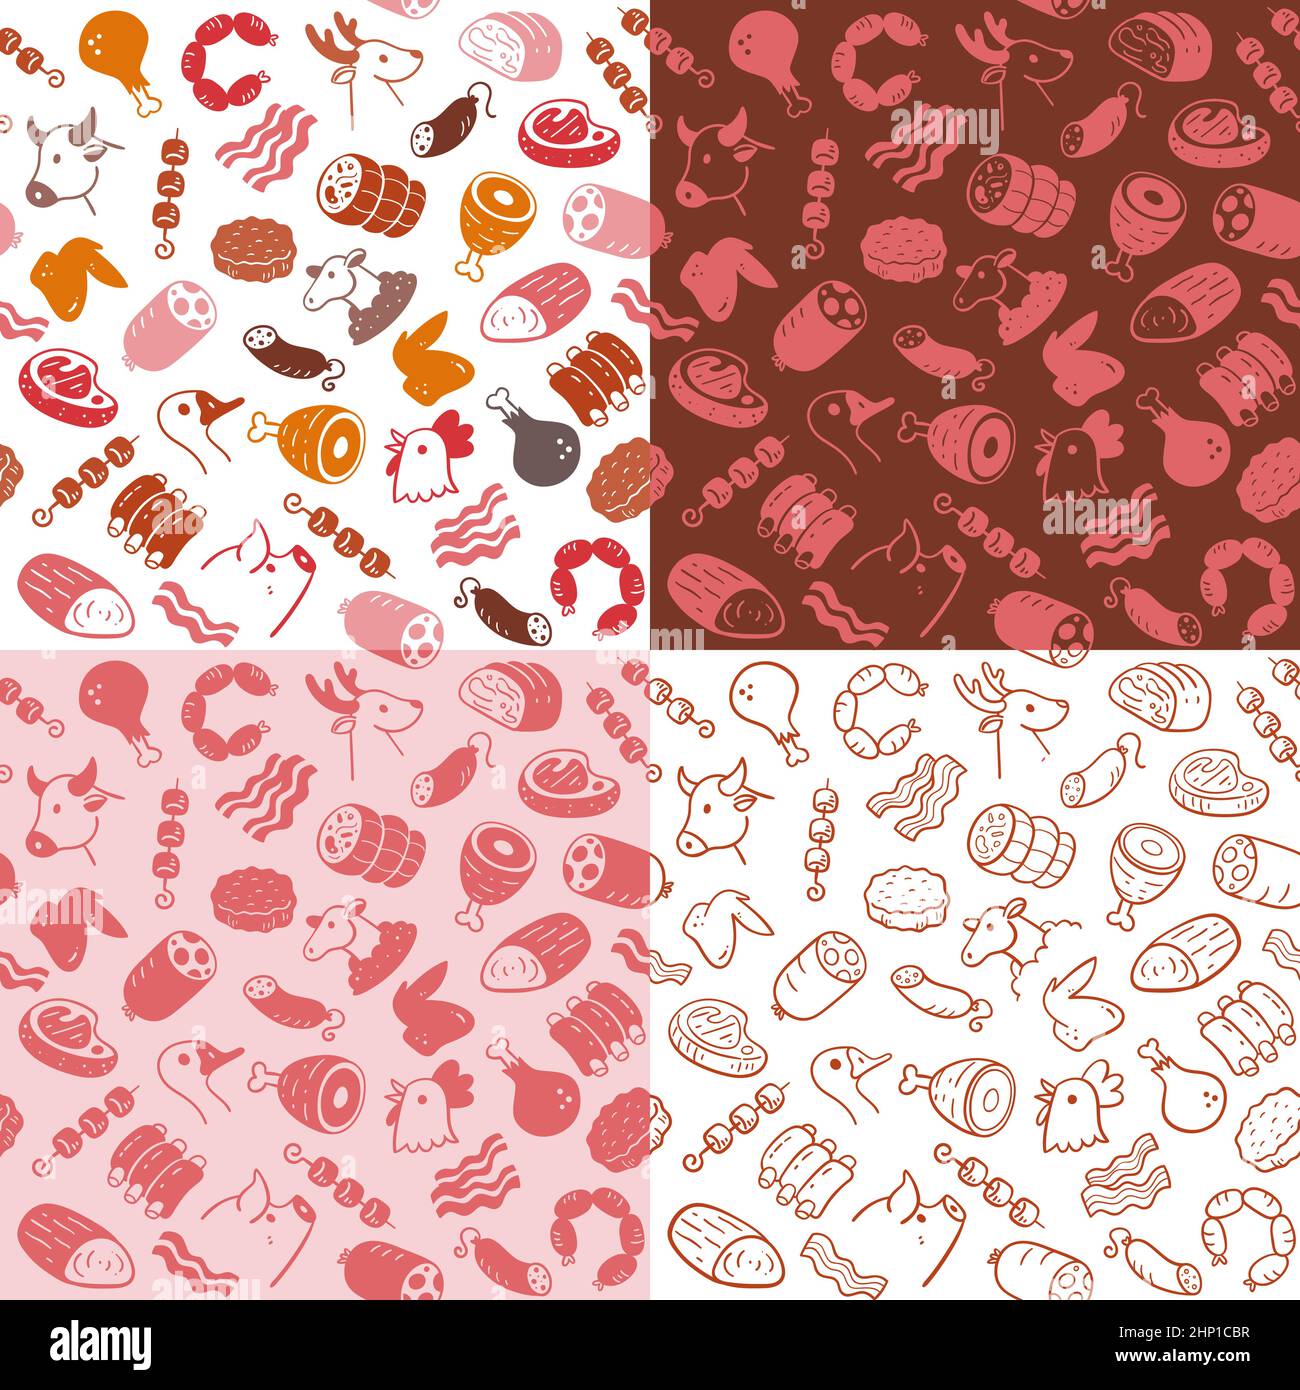 Meat seamless pattern collection. Pieces of meat and meat products